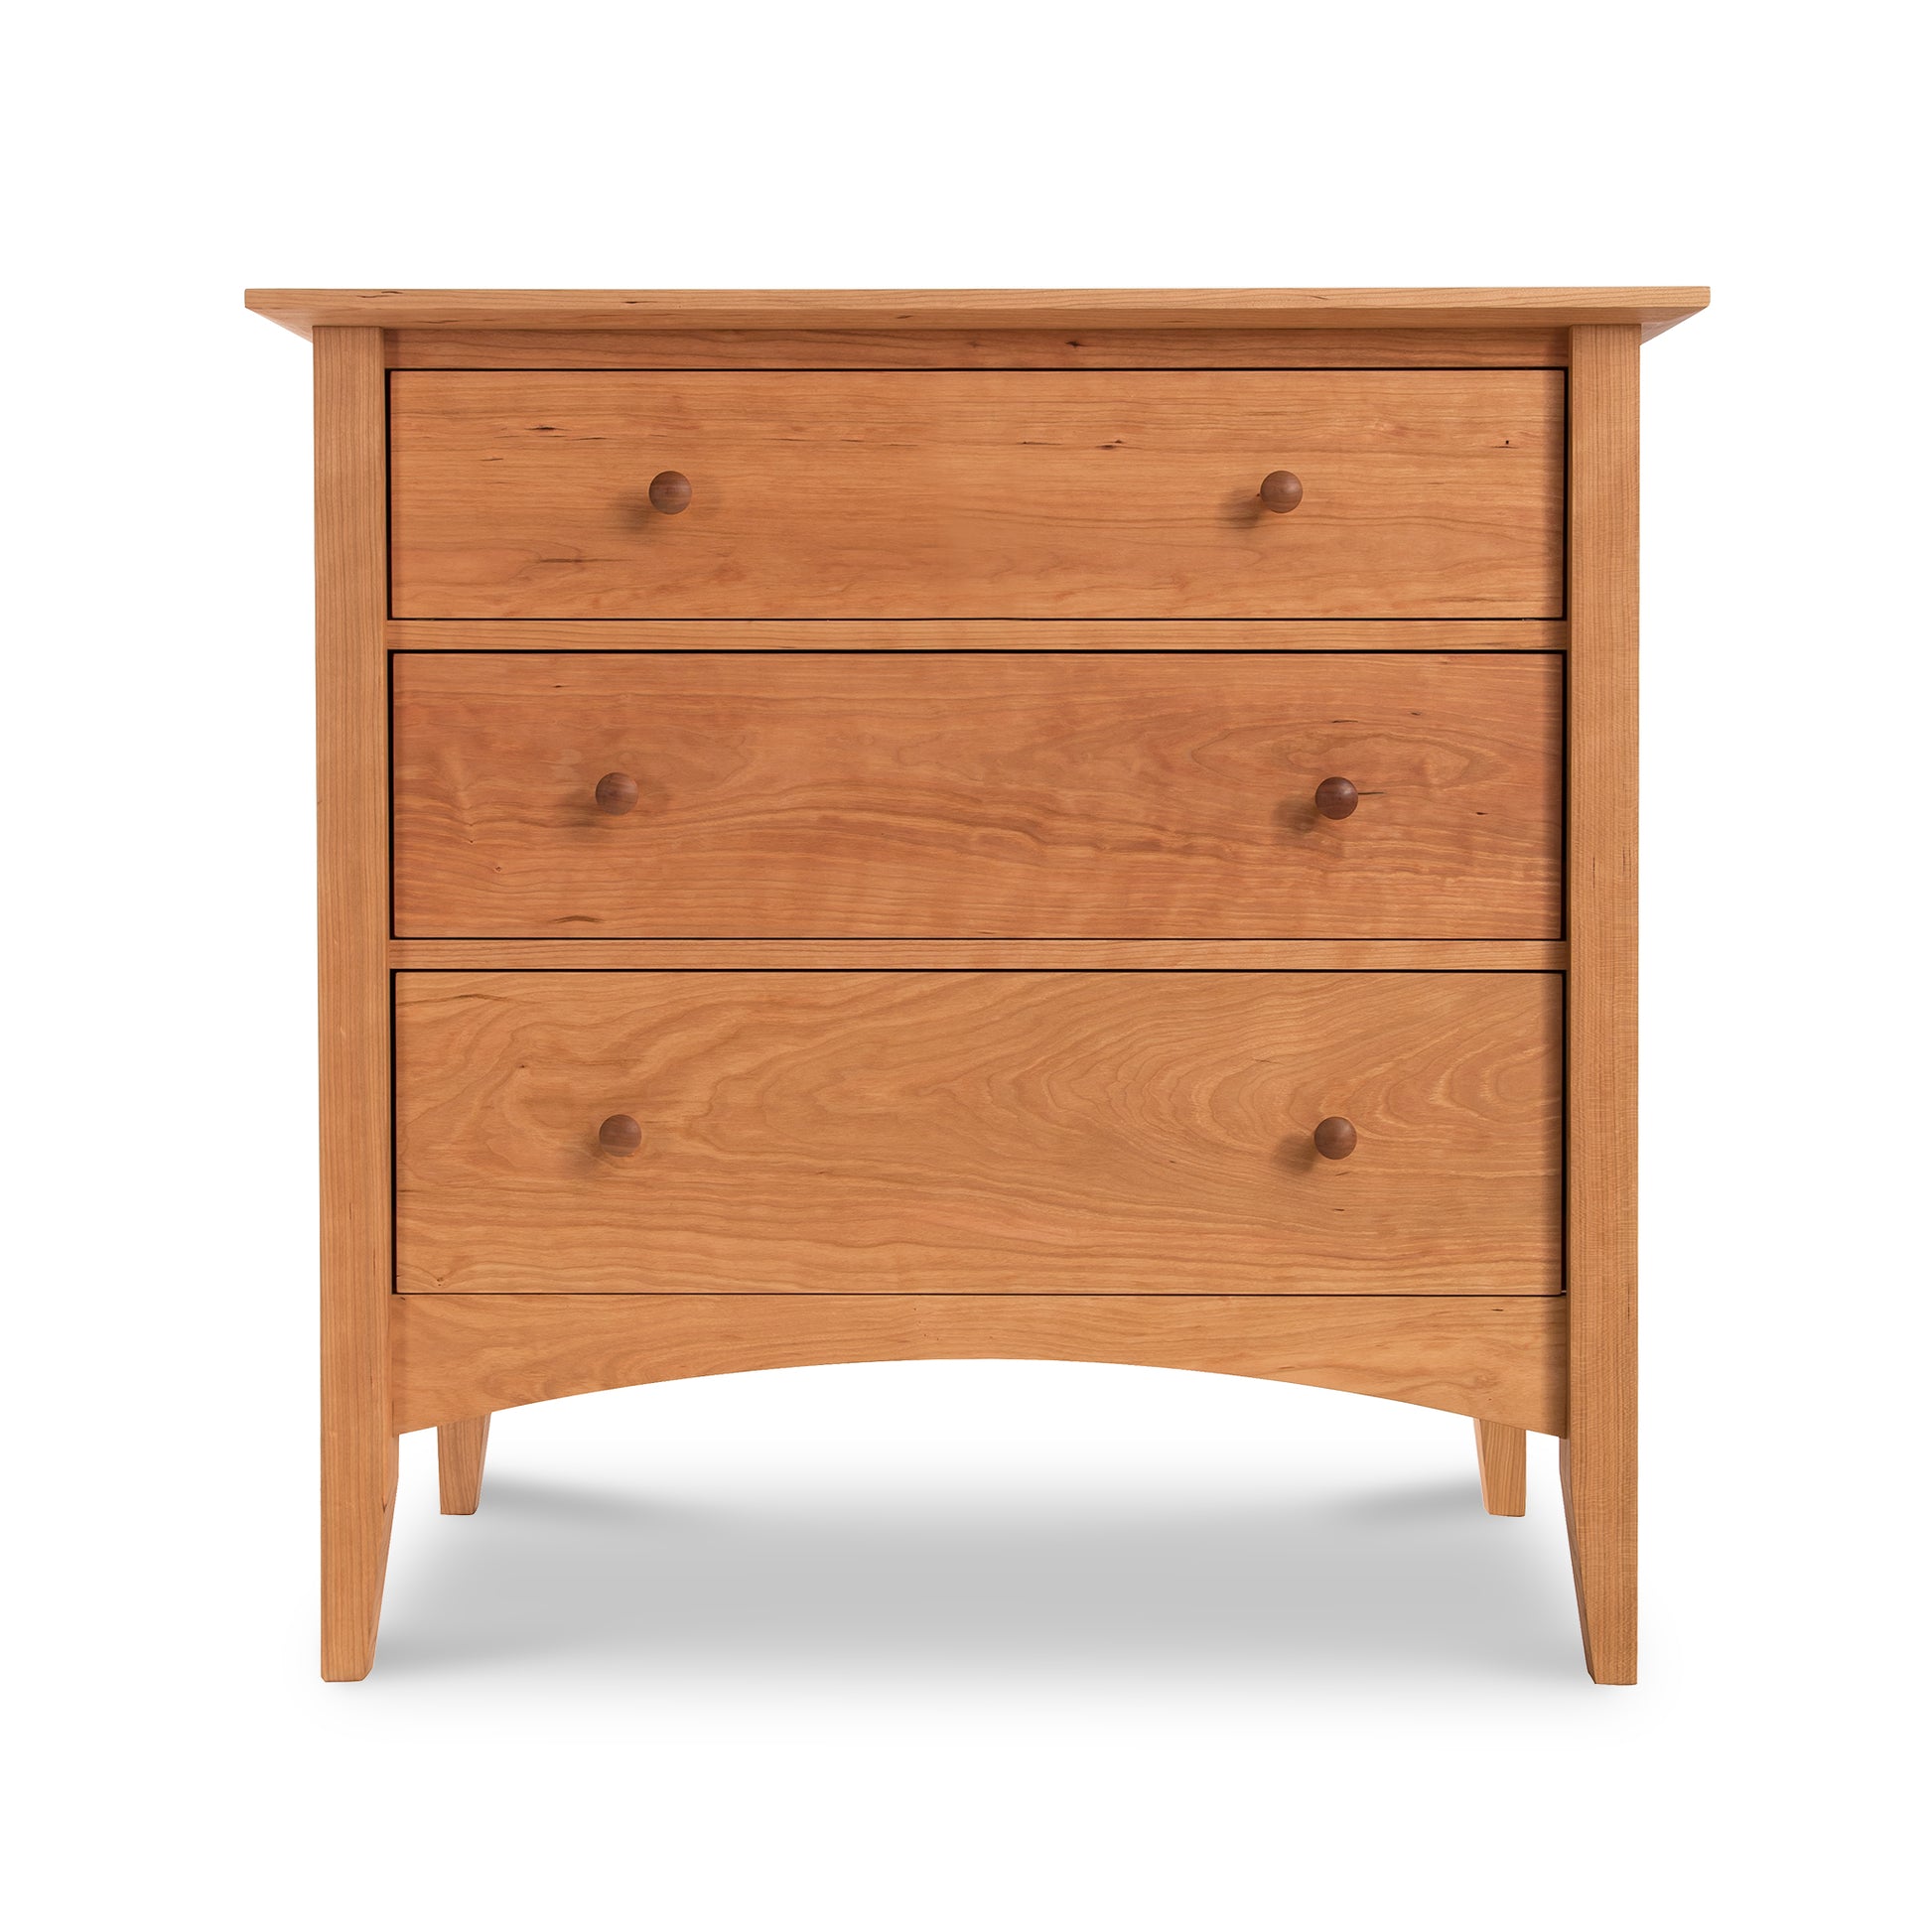 An heirloom Maple Corner Woodworks American Shaker 3-Drawer Chest isolated on a white background.